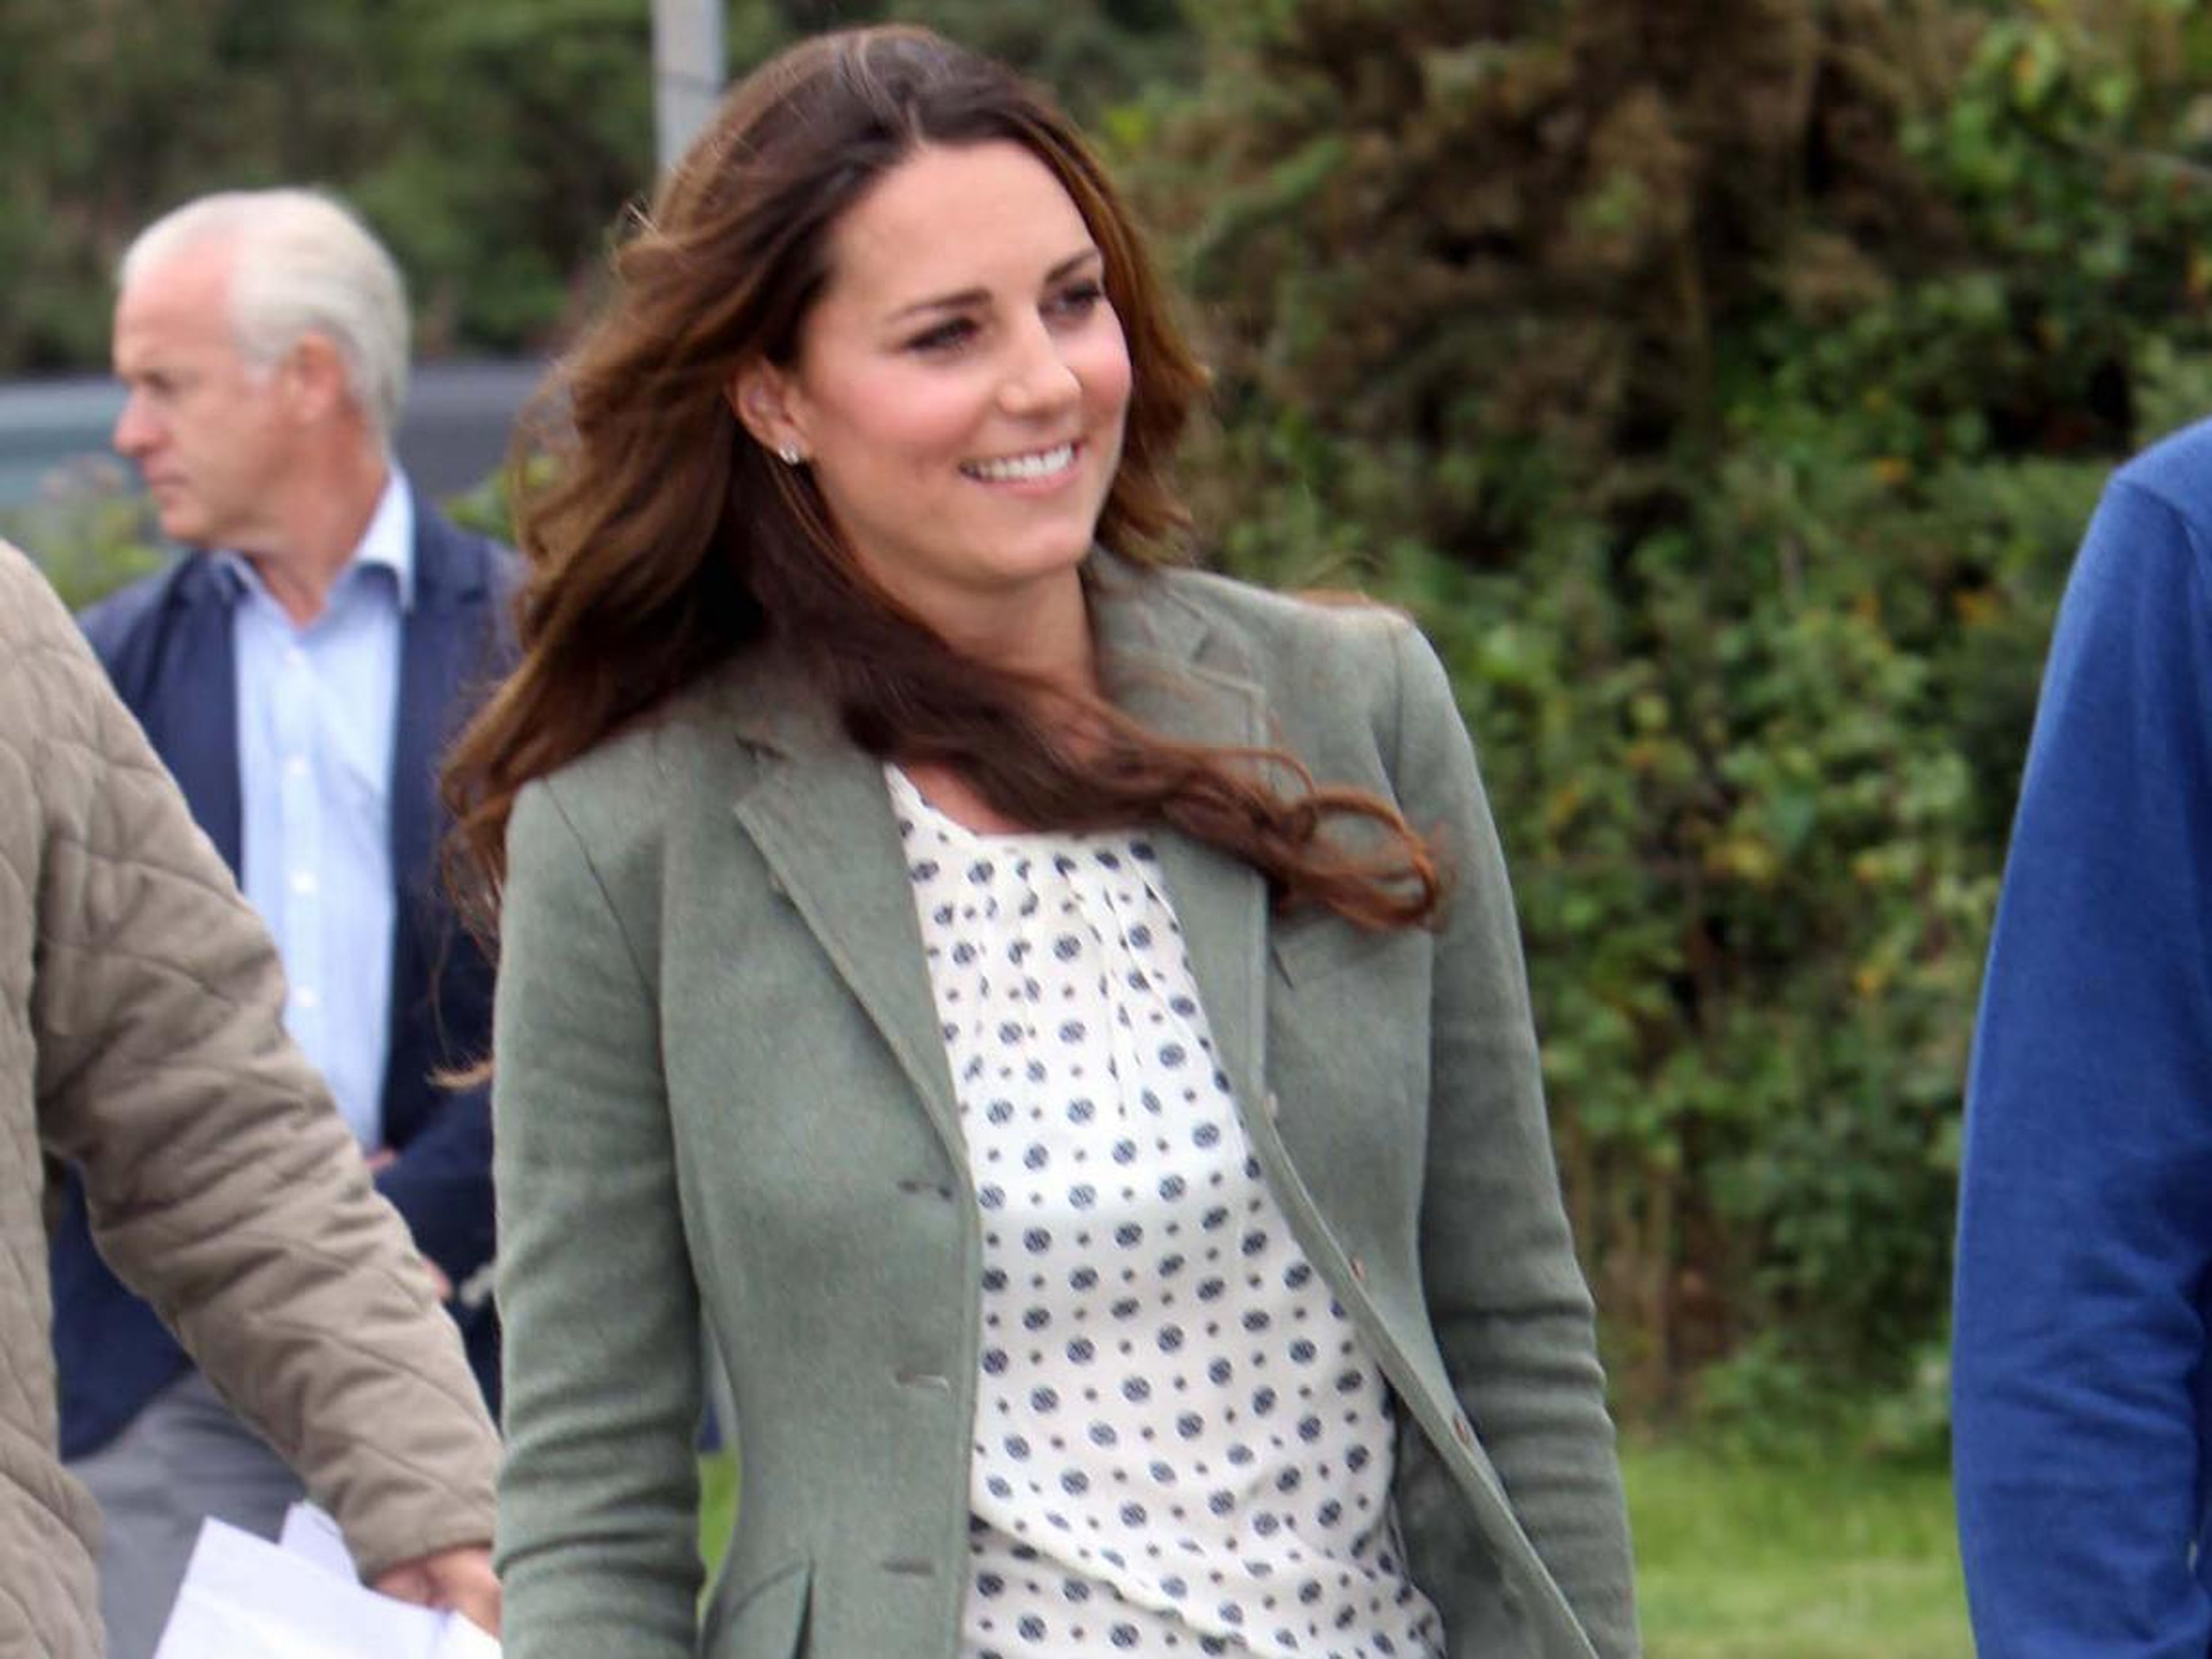 Kate Middleton, the Duchess of Cambridge, is one of the most prominent fans of Zara's designs and is often photographed in its clothing.